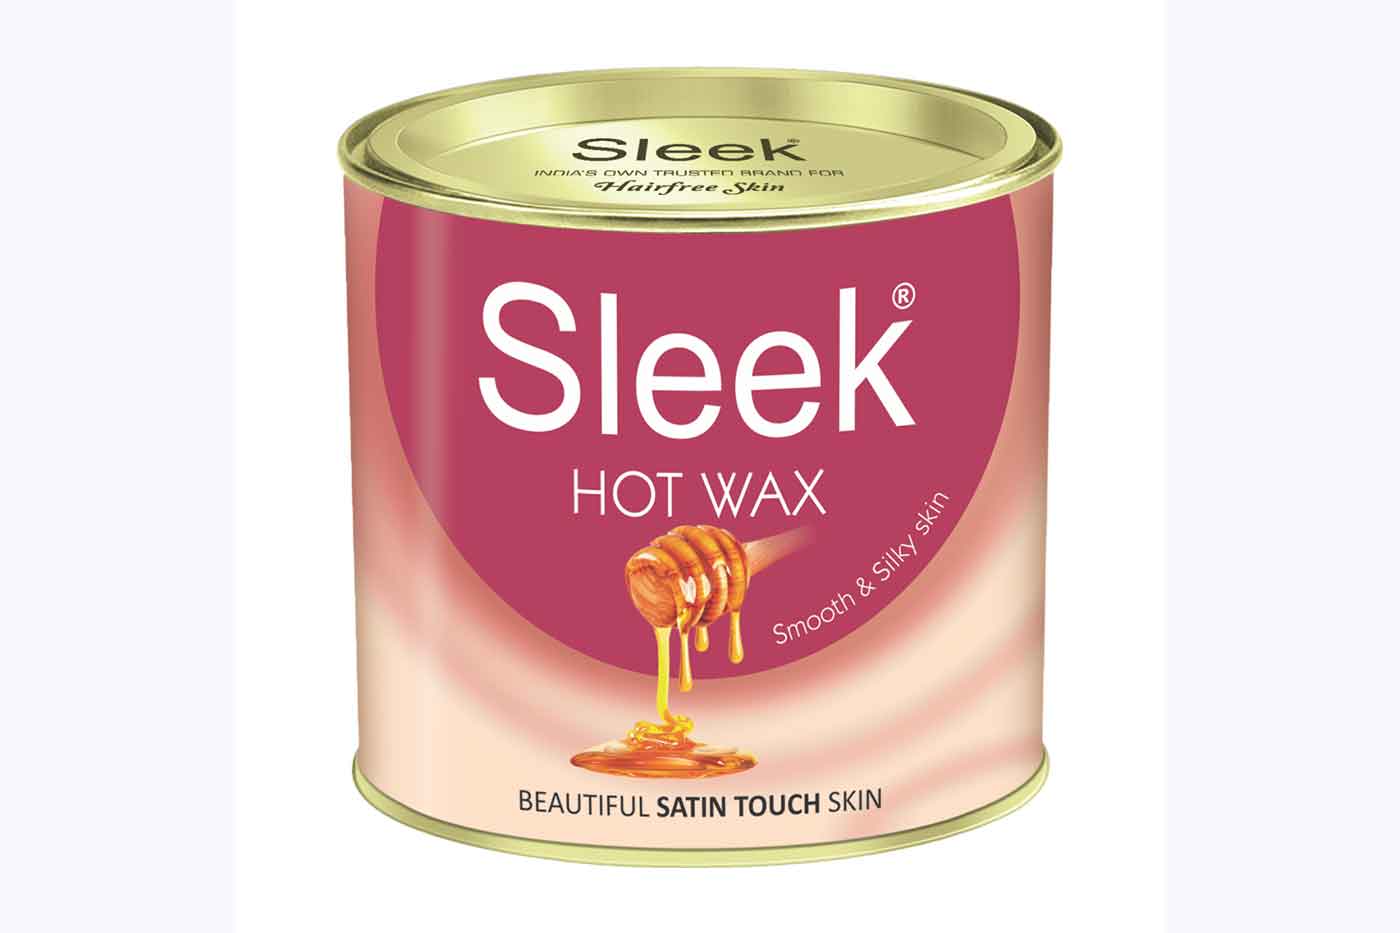 Sleek Hot Wax for a quick and easy waxing session